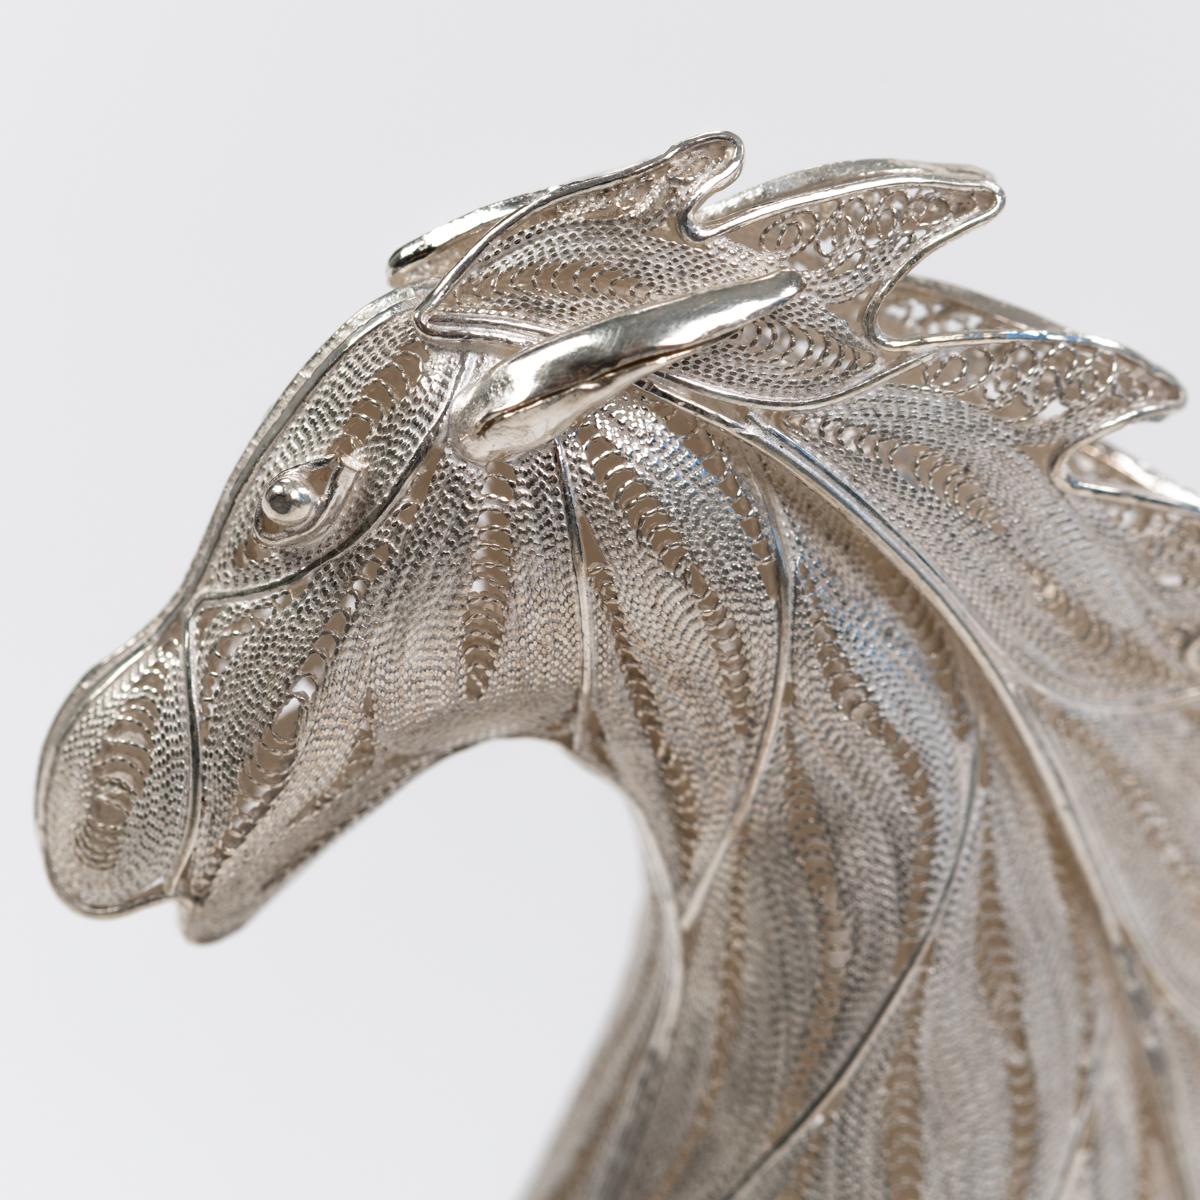 Jumping Horse Sculpture 925 Silver Handcrafted Filigree Technique Germany 2005 For Sale 7